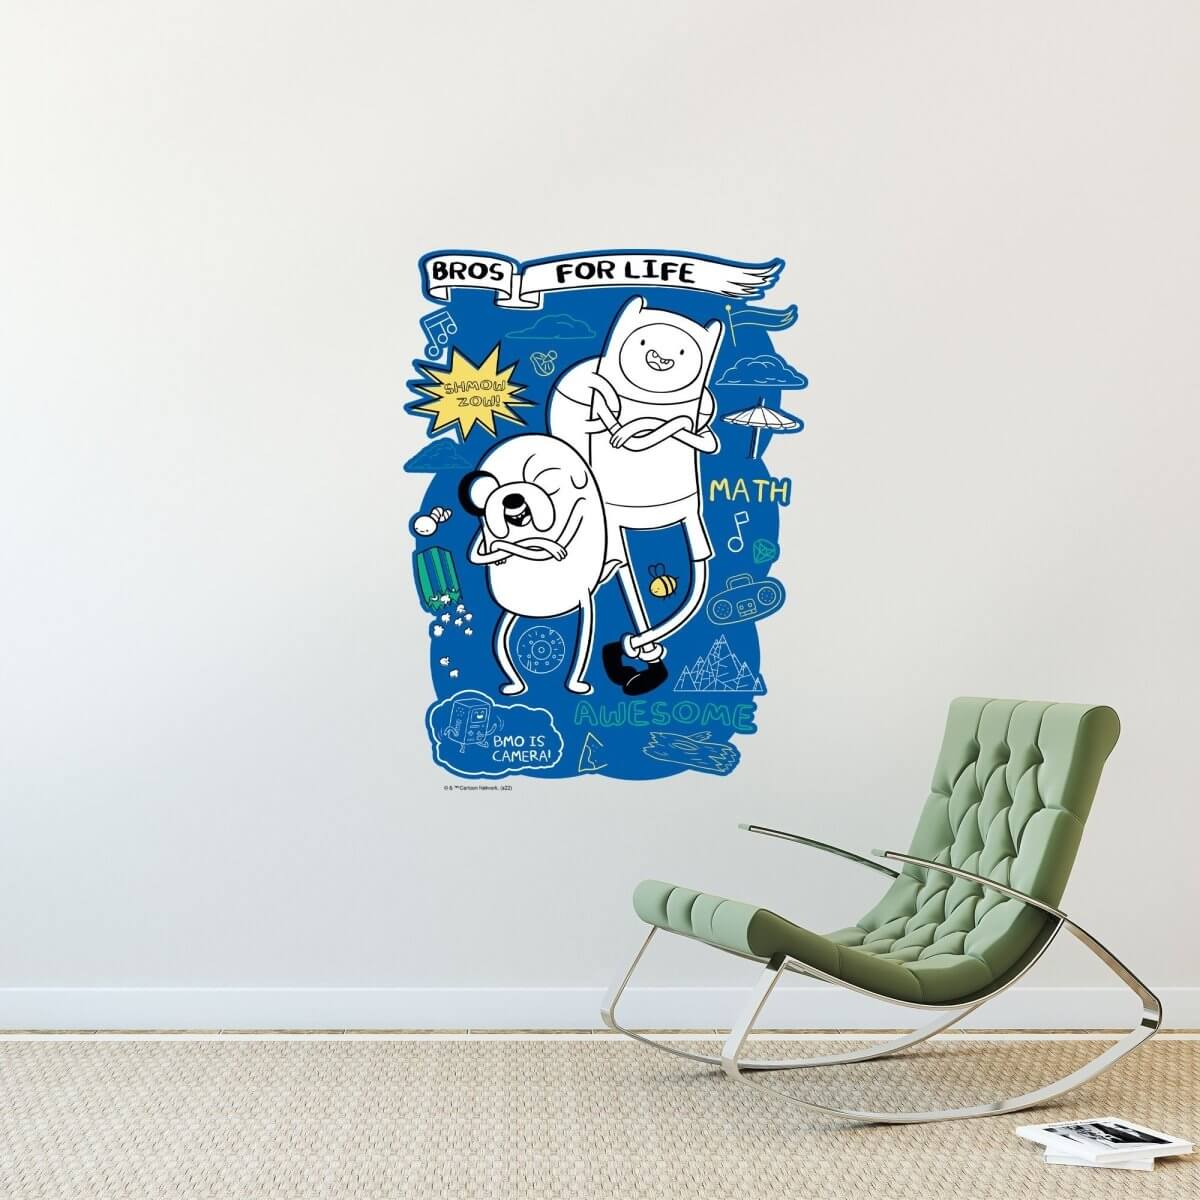 Kismet Decals Adventure Time Bros for Life Licensed Wall Sticker - Easy DIY Home & Kids Room Decor Wall Decal Art - Kismet Decals